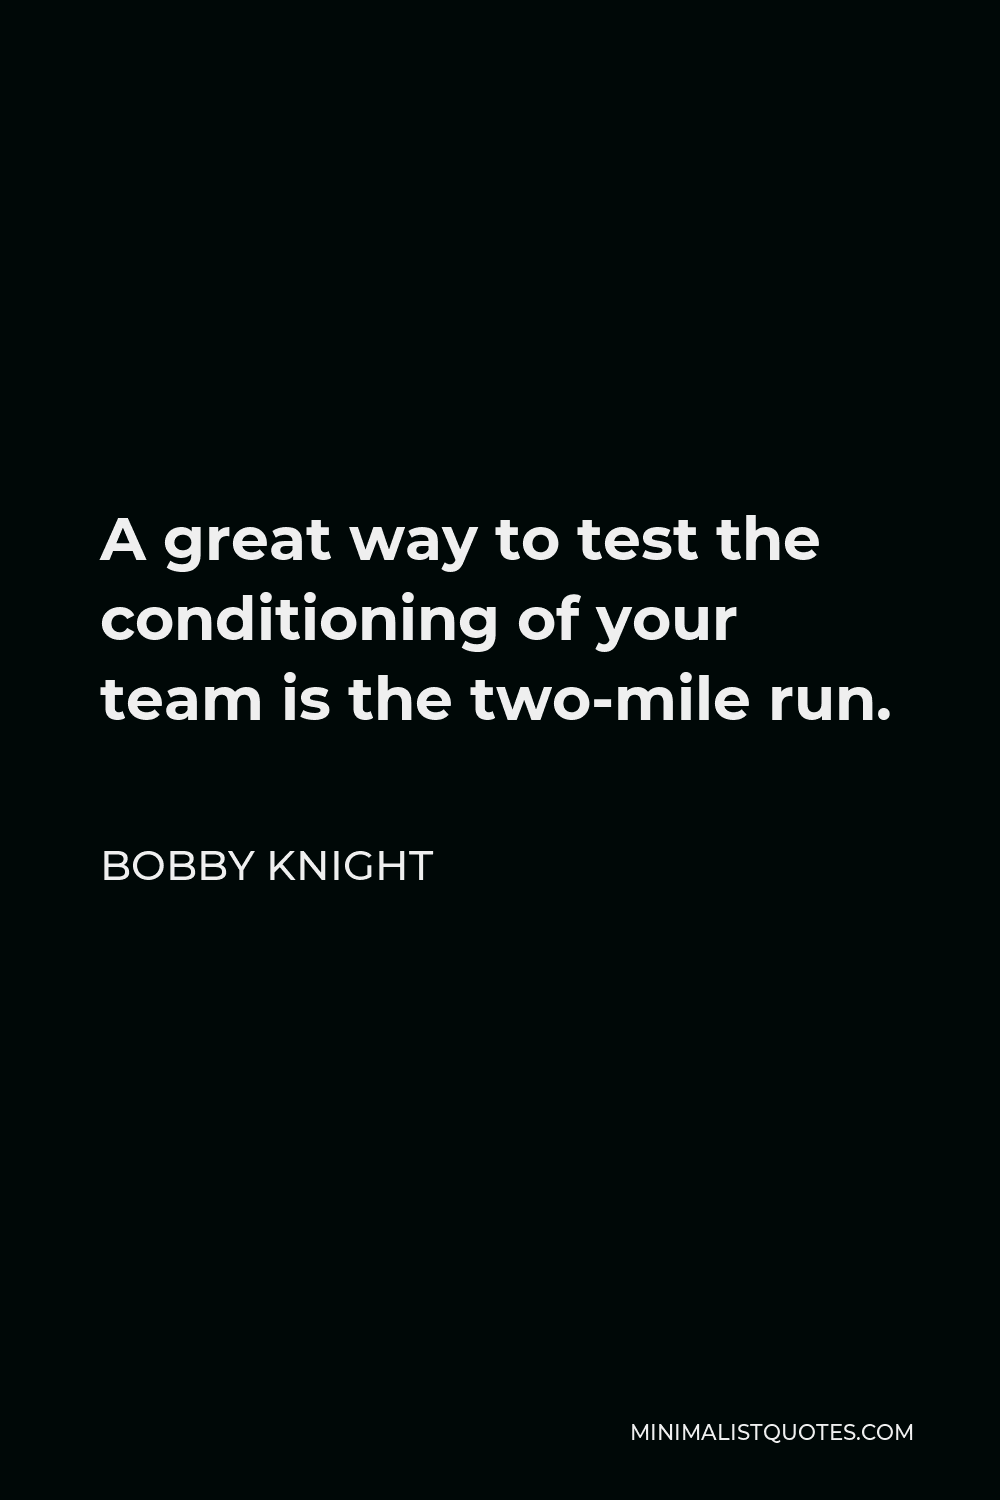 Bobby Knight Quote - A great way to test the conditioning of your team is the two-mile run.